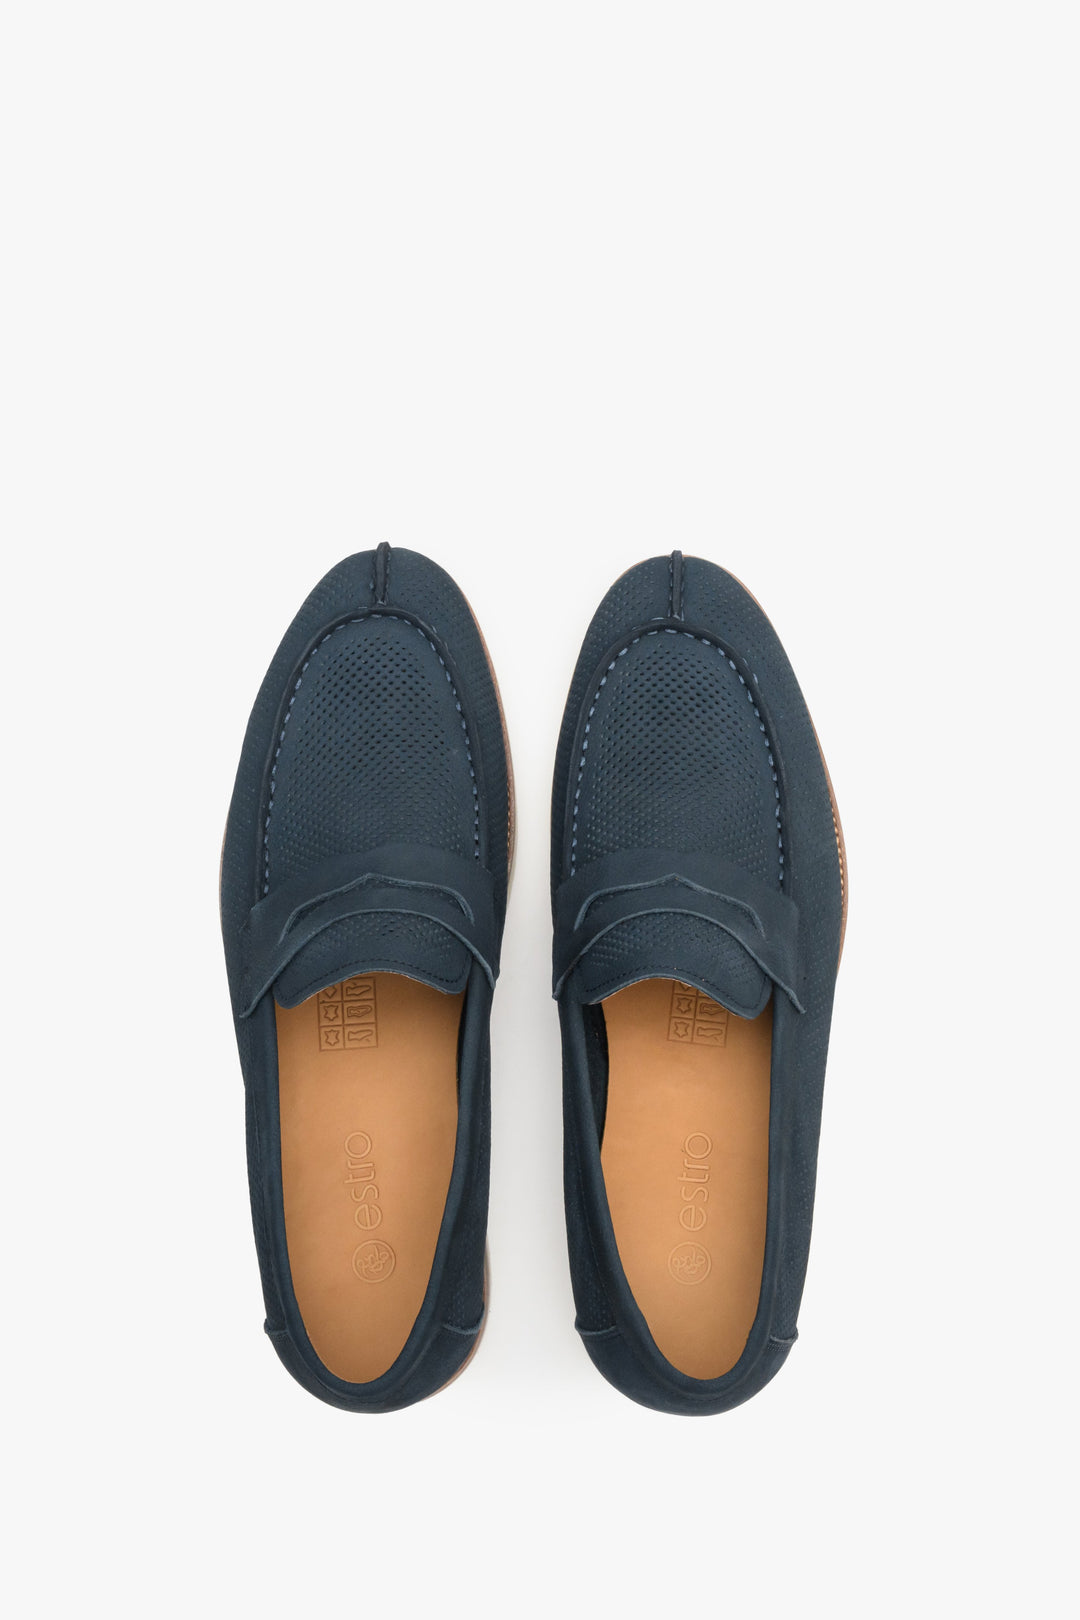 Navy blue nubuck men's loafers for fall and spring - top view model presentation.